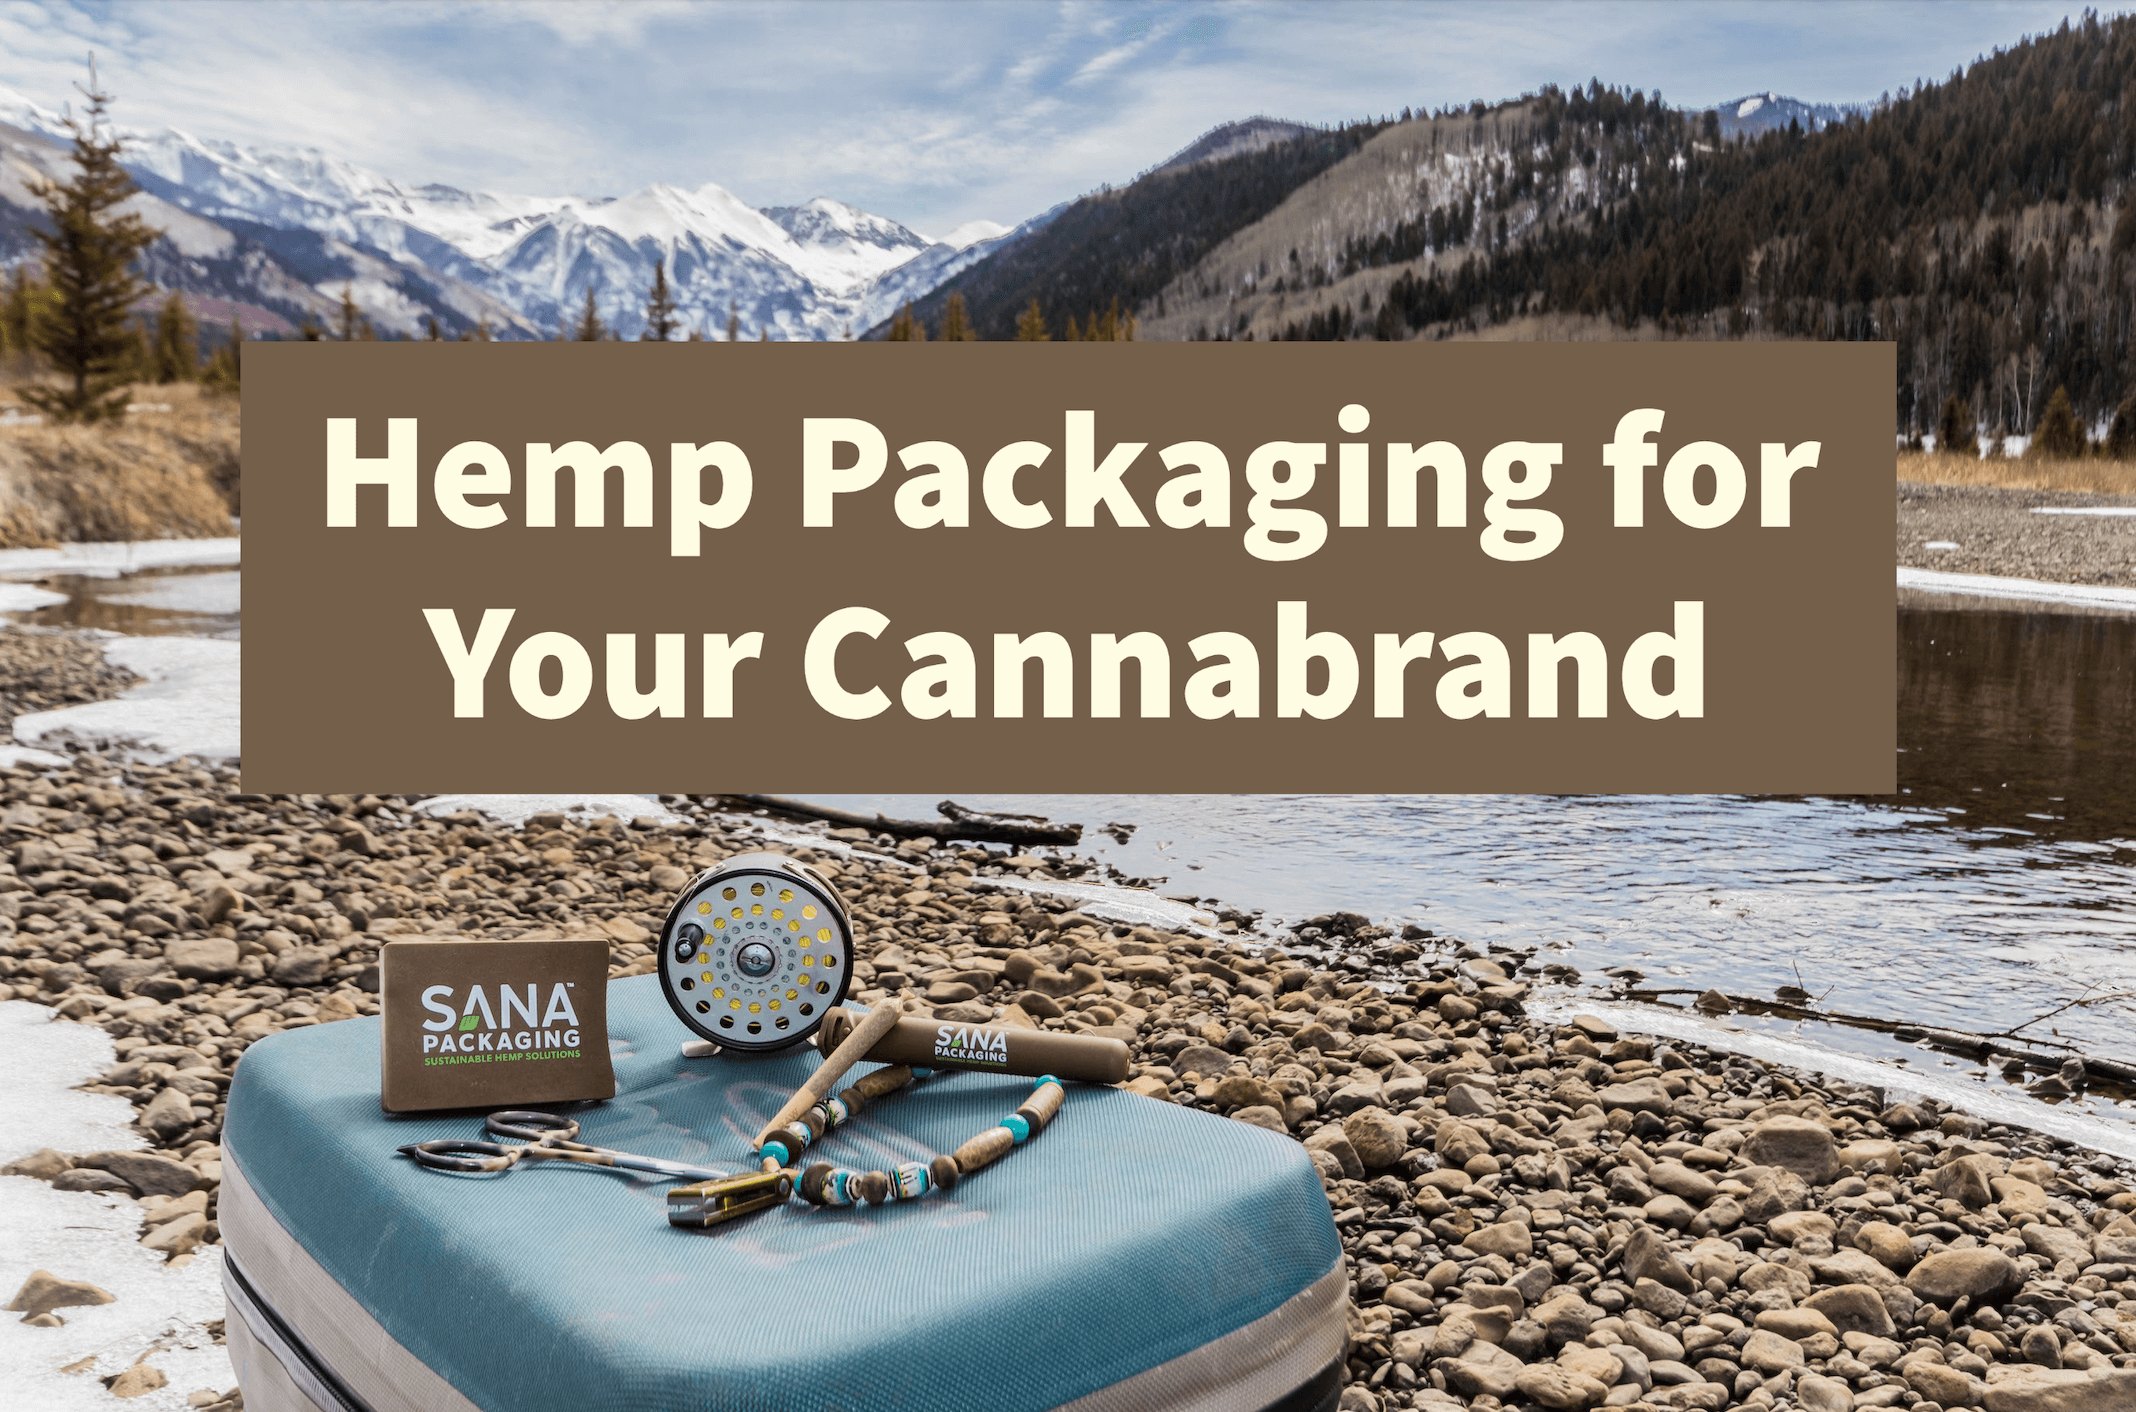 How to Get Custom Hemp Packaging for Your Cannabrand